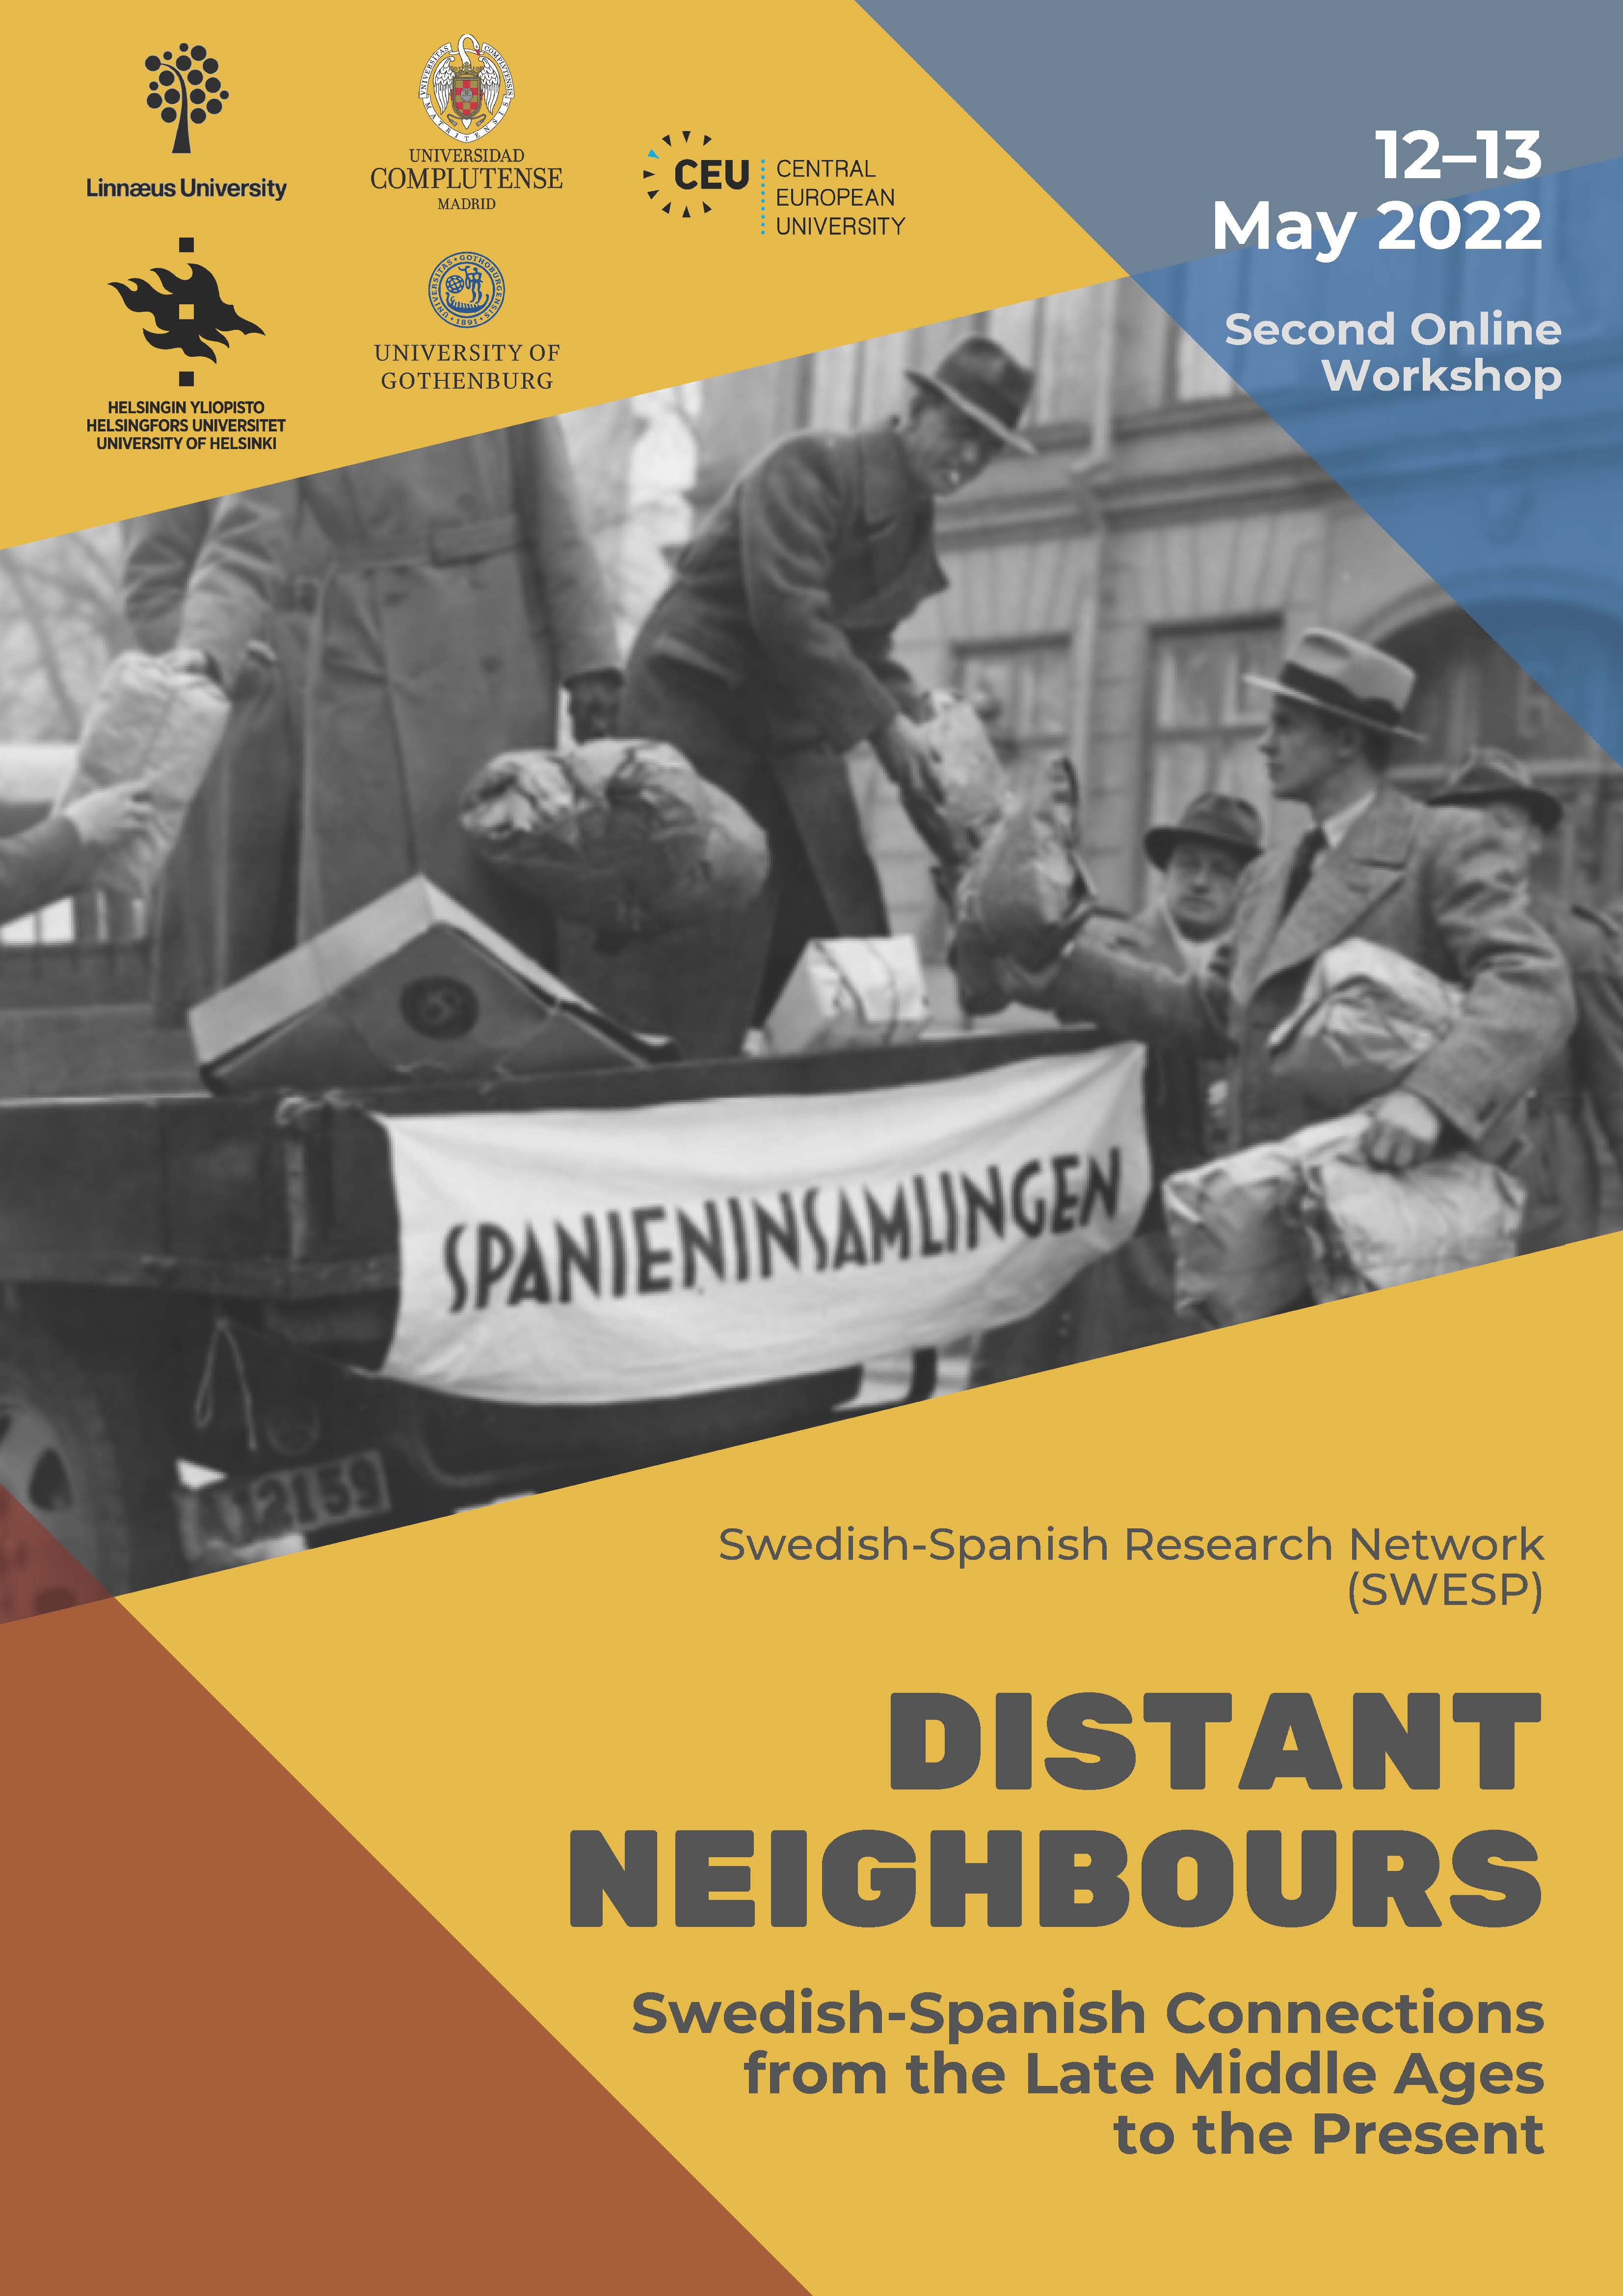 Second Online Workshop Distant Neighbours. Swedish-Spanish Connections from the Late Middle Ages to the Present (12-13.05.2022)